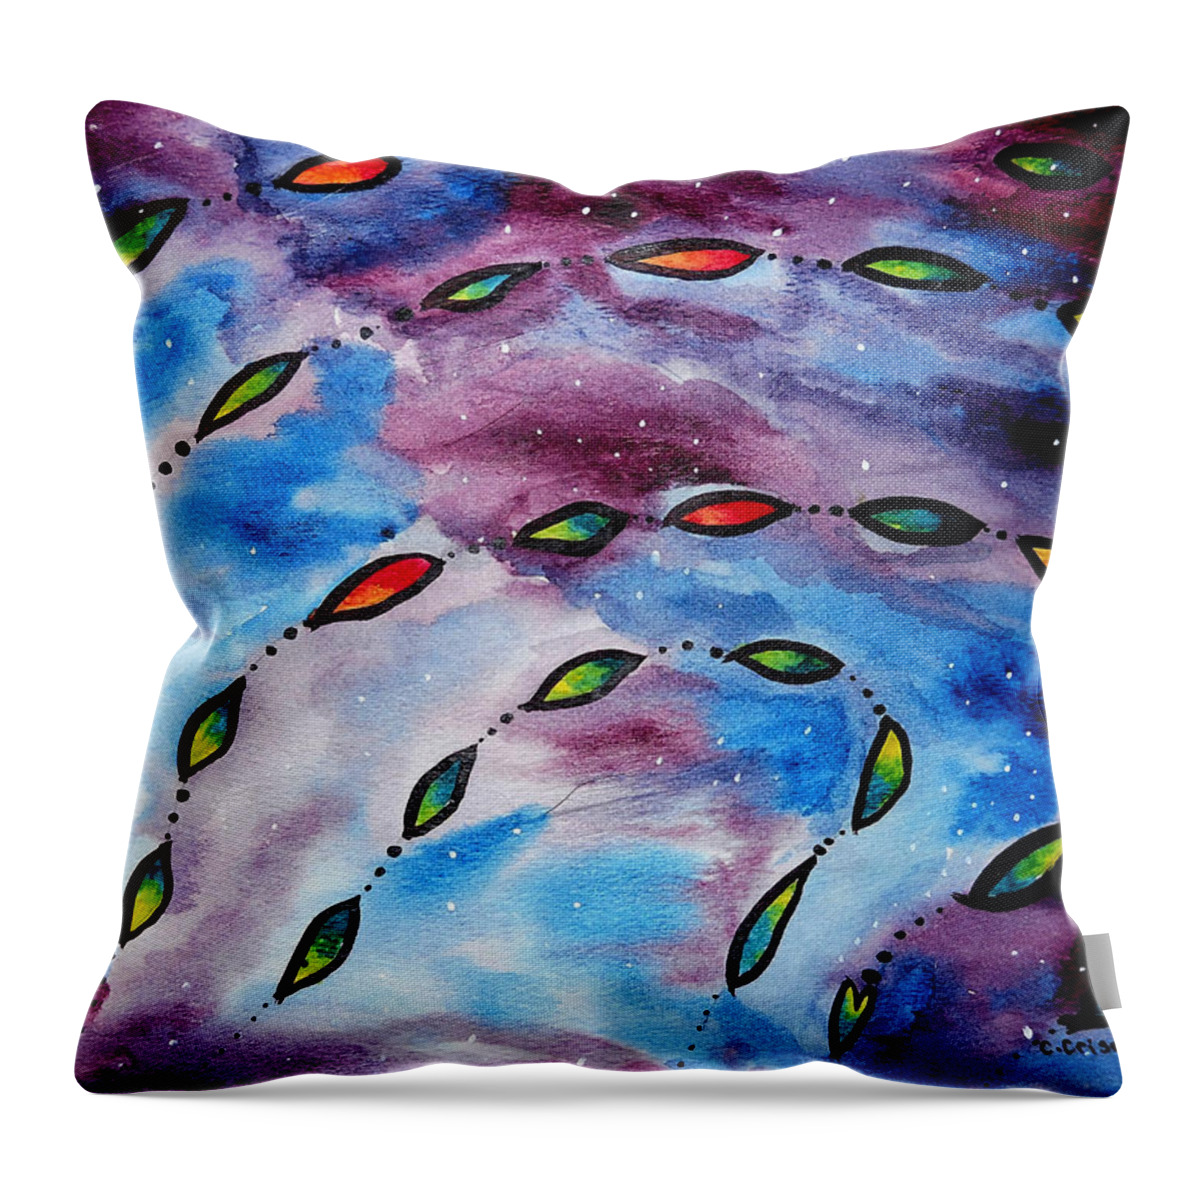 Watercolor Throw Pillow featuring the painting Kites in the Cosmos by Carol Crisafi